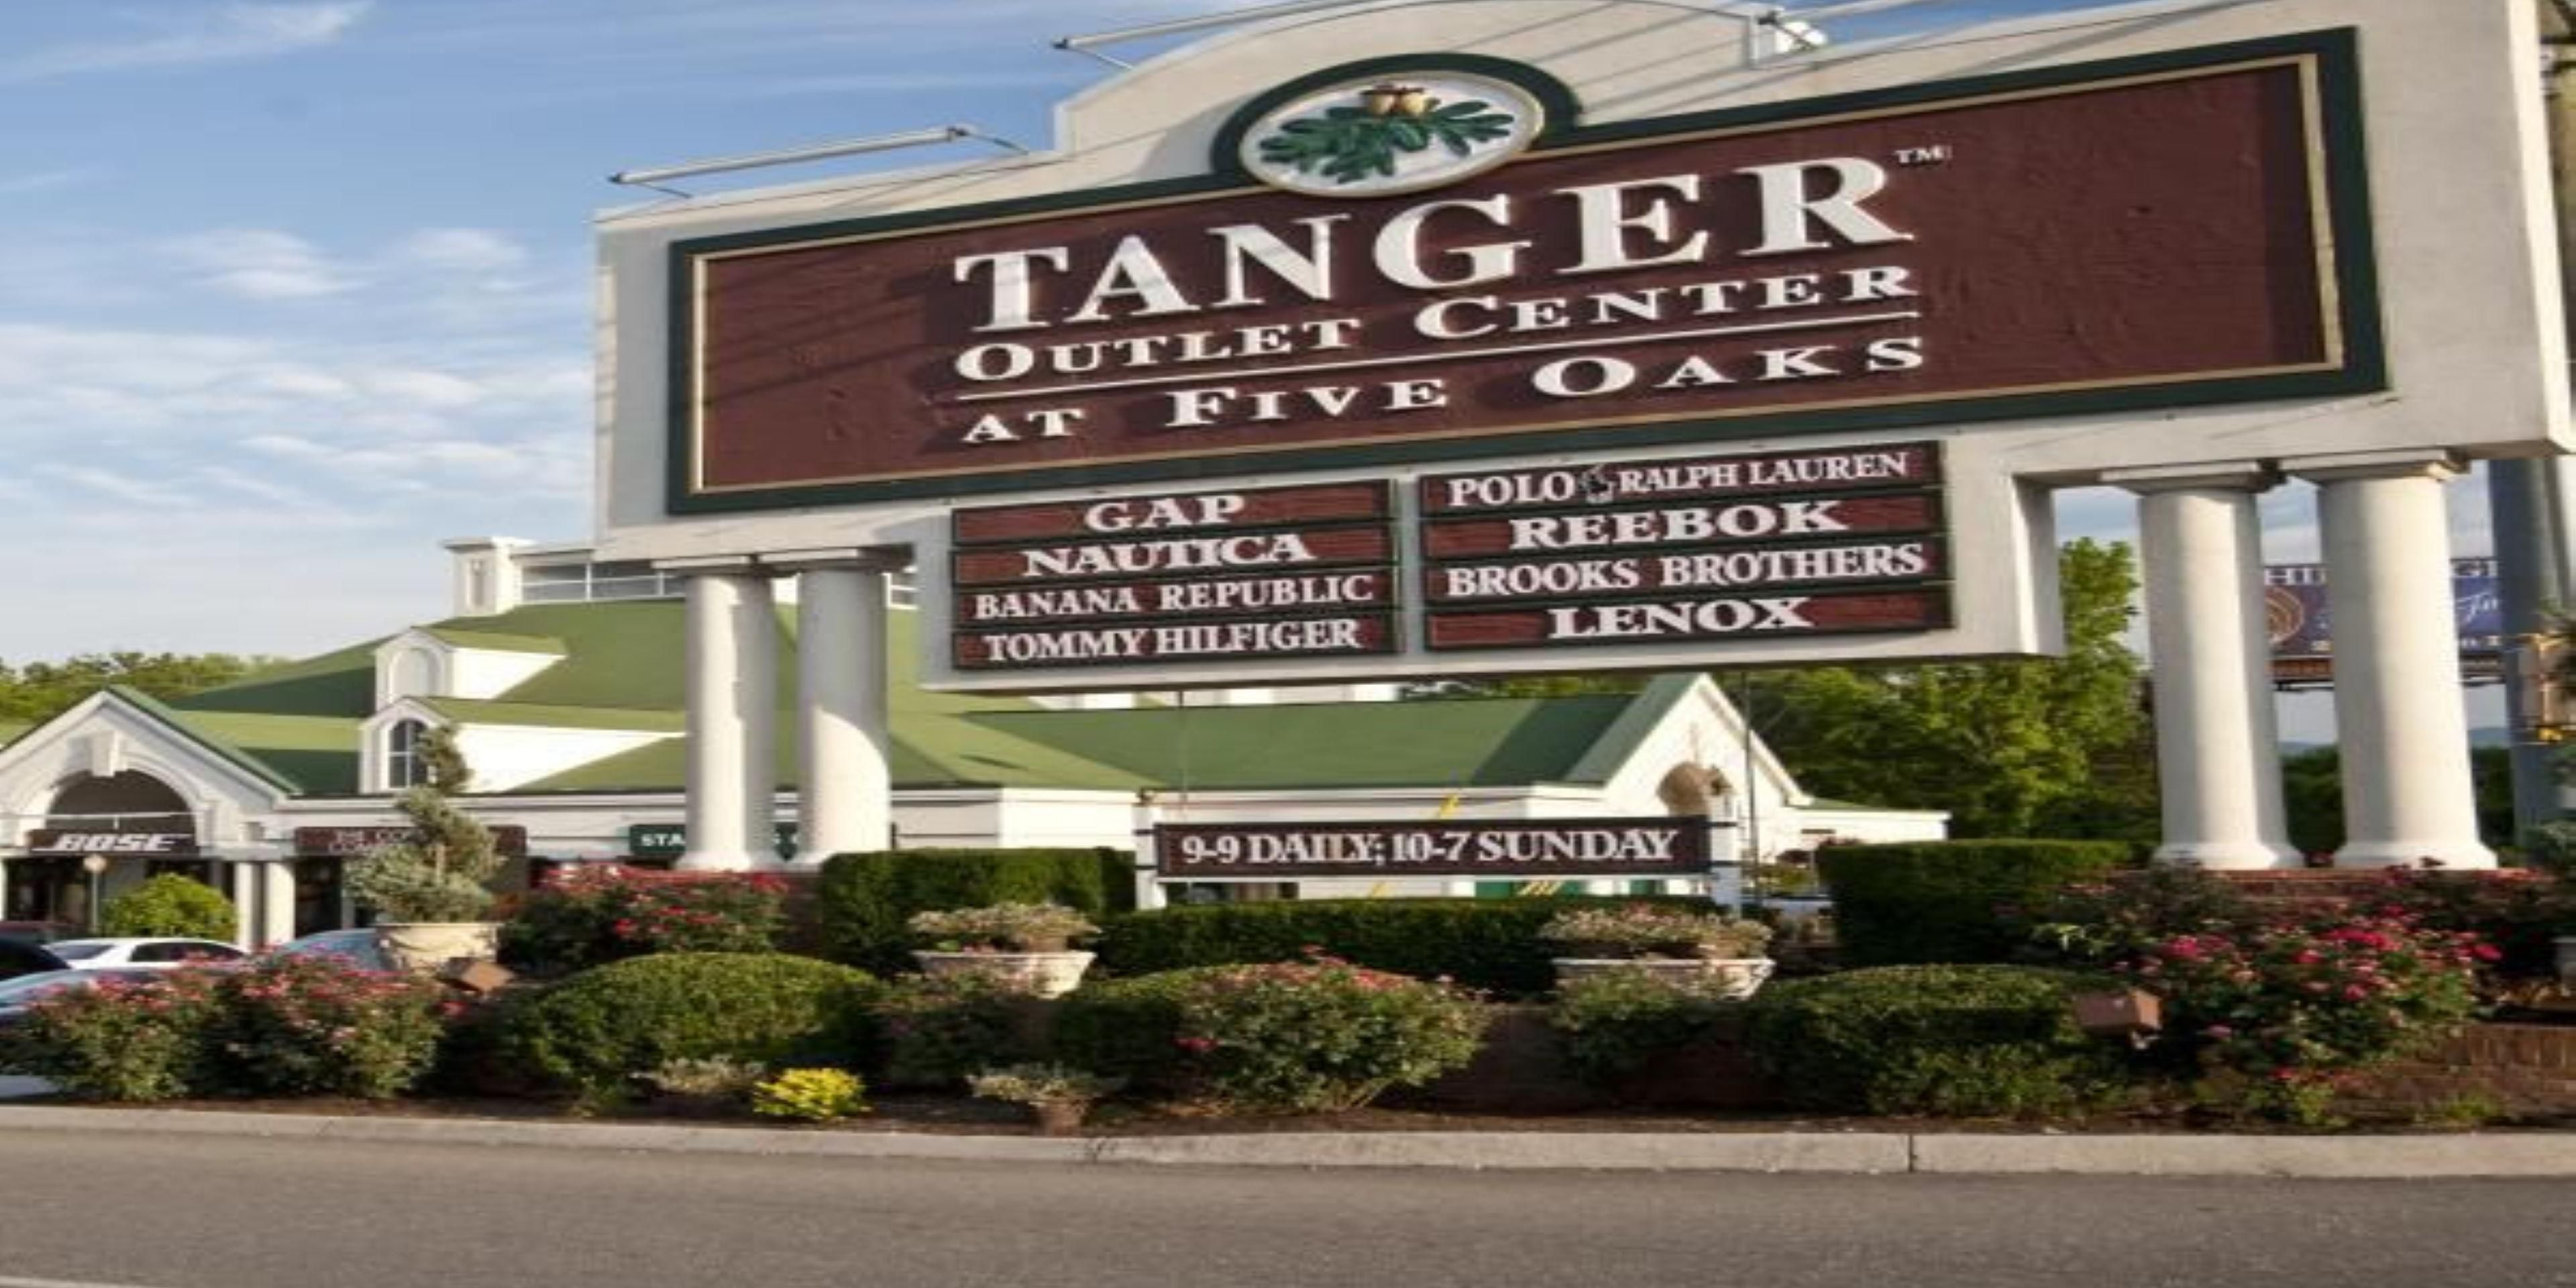 Tanger Outlets at Five Oaks in Sevierville is located  1.4 miles from the Holiday Inn Express Pigeon Forge-Sevierville.  Stop by  Shoppers Services to pick up a coupon book and map to maximize your shopping experience.  Tanger Outlets Sevierville is an outdoor mall home to over a 100 options to shop and dine.